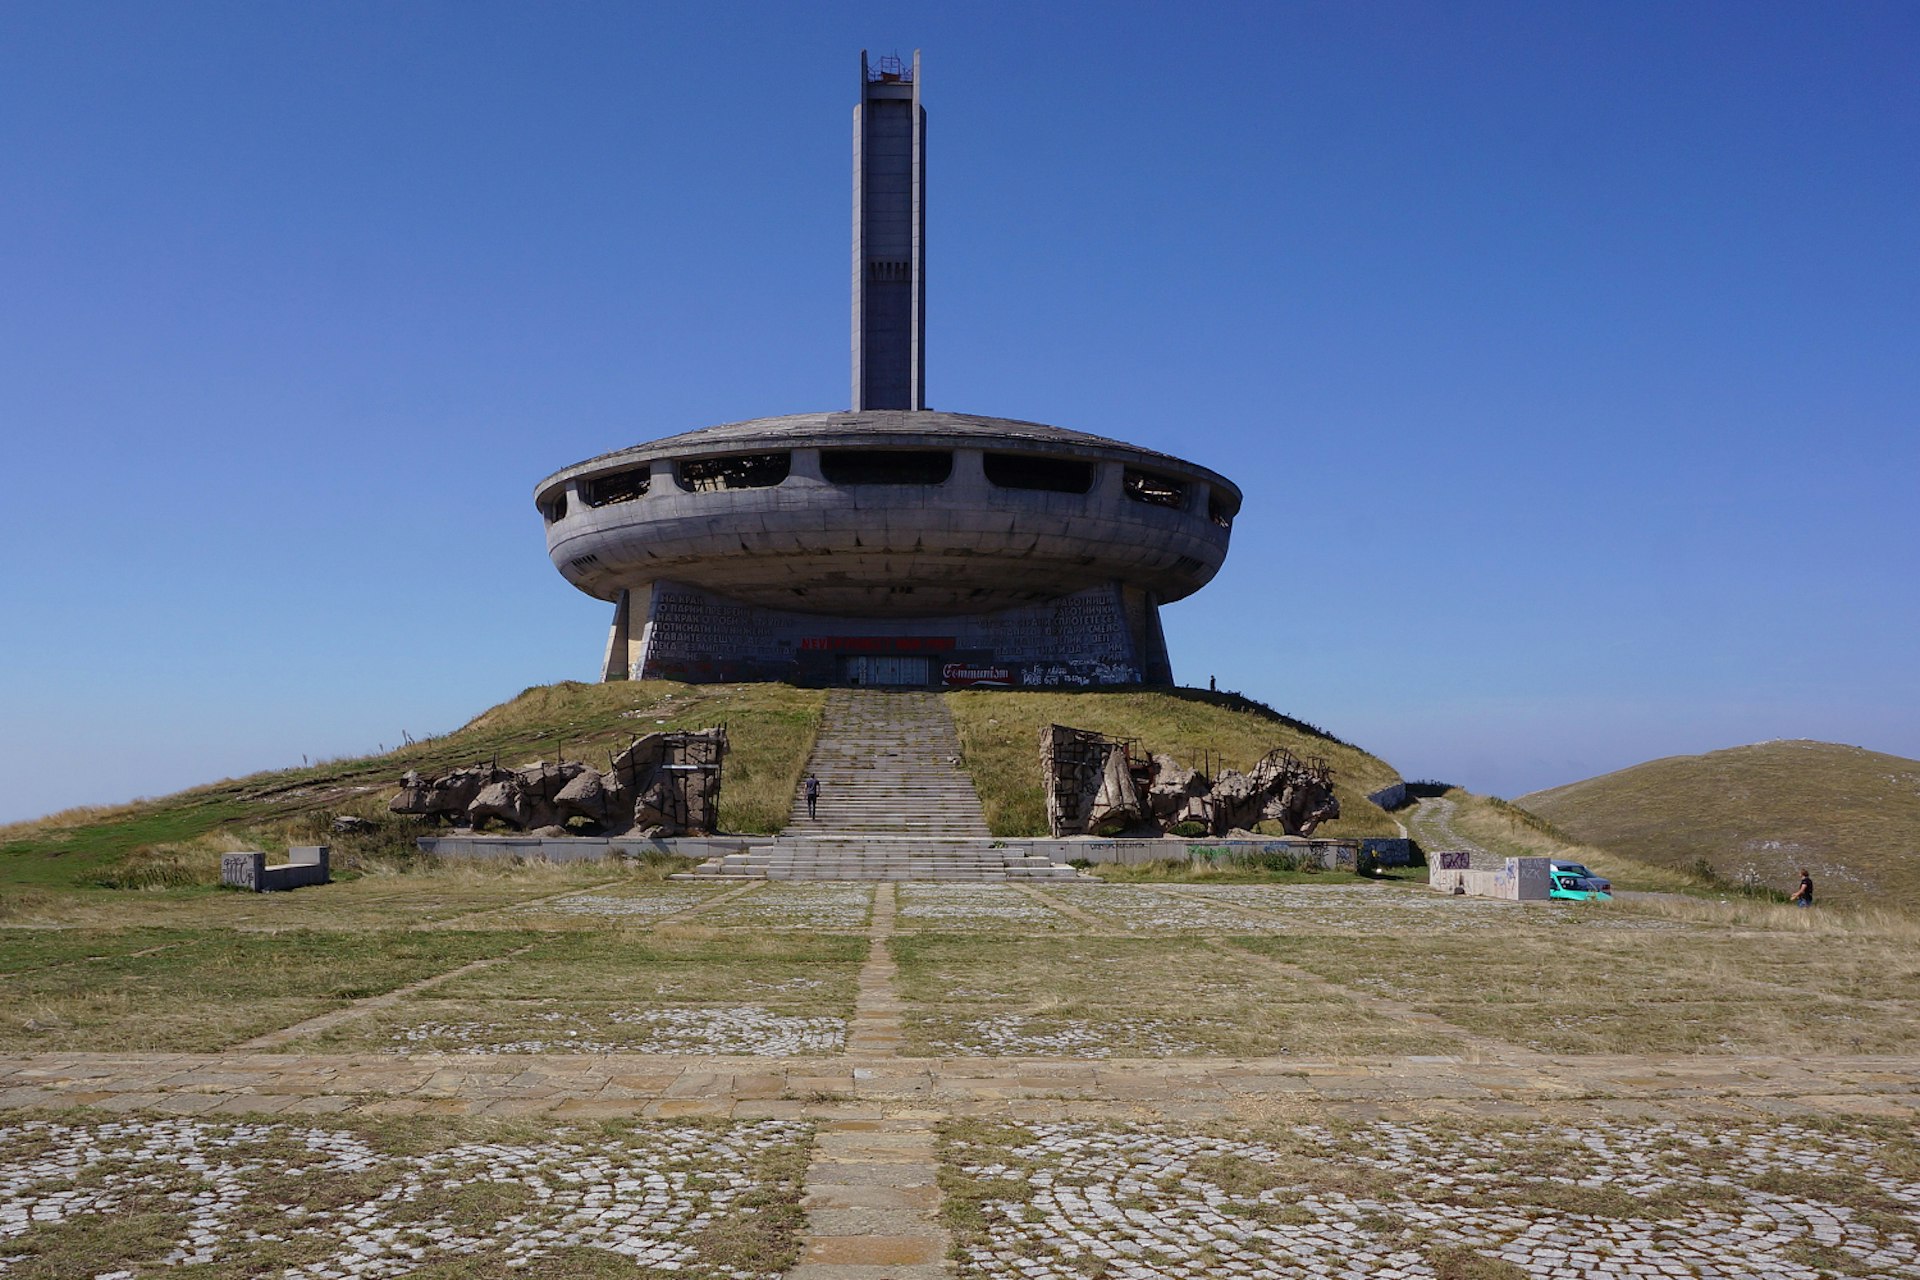 The saucer-shaped Buzludzha monument is known as Bulgaria's UFO © Anita Isalska / Lonely Planet